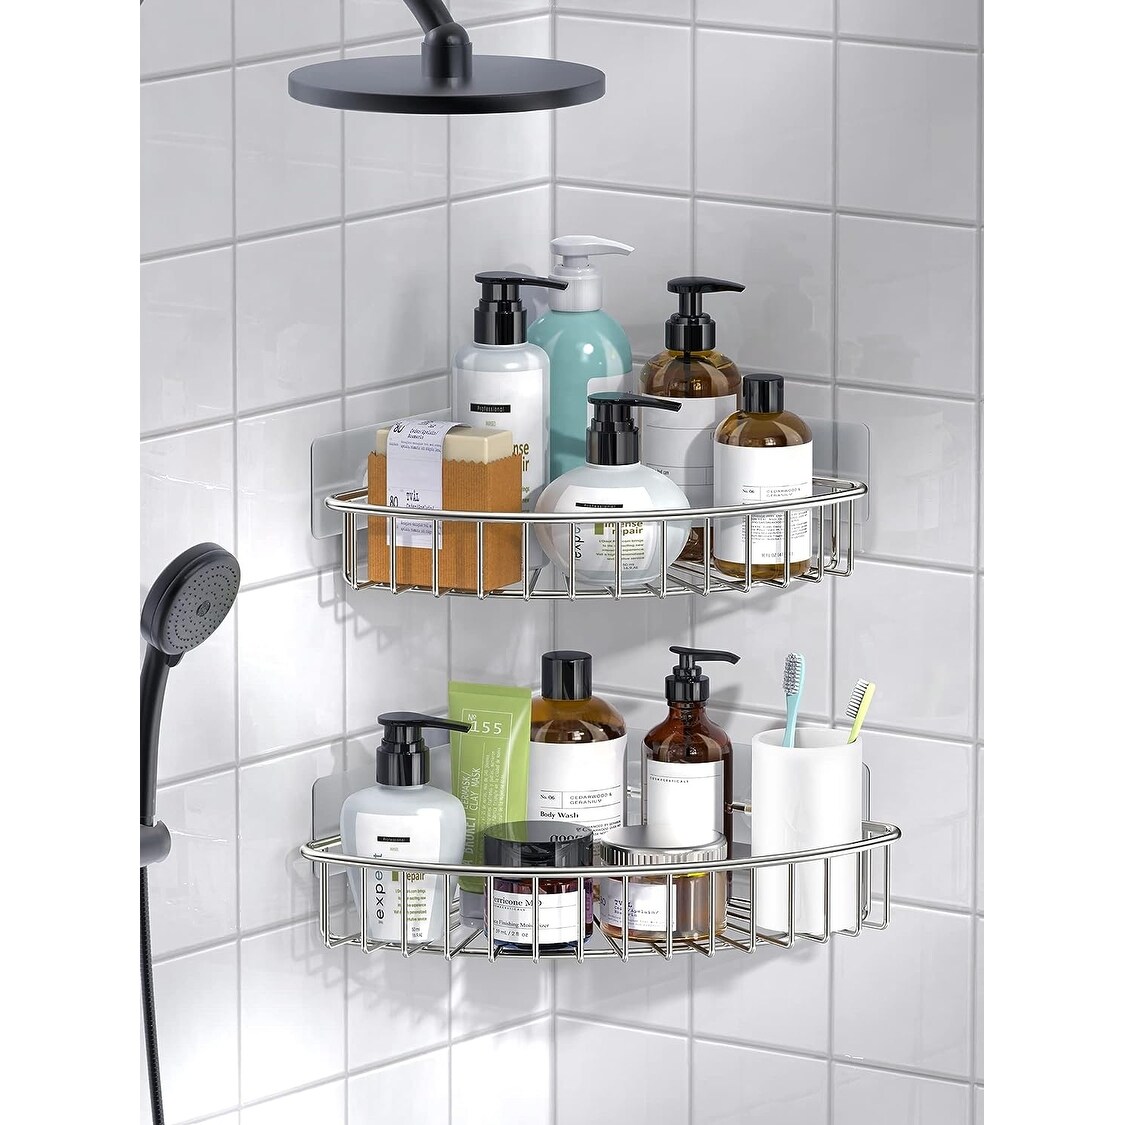 https://ak1.ostkcdn.com/images/products/is/images/direct/df56c71a95cd8cc931cbe93fb89d0c754b94189a/2-Pack-Corner-Shower-Caddy%2C-SUS304-Stainless-Steel.jpg